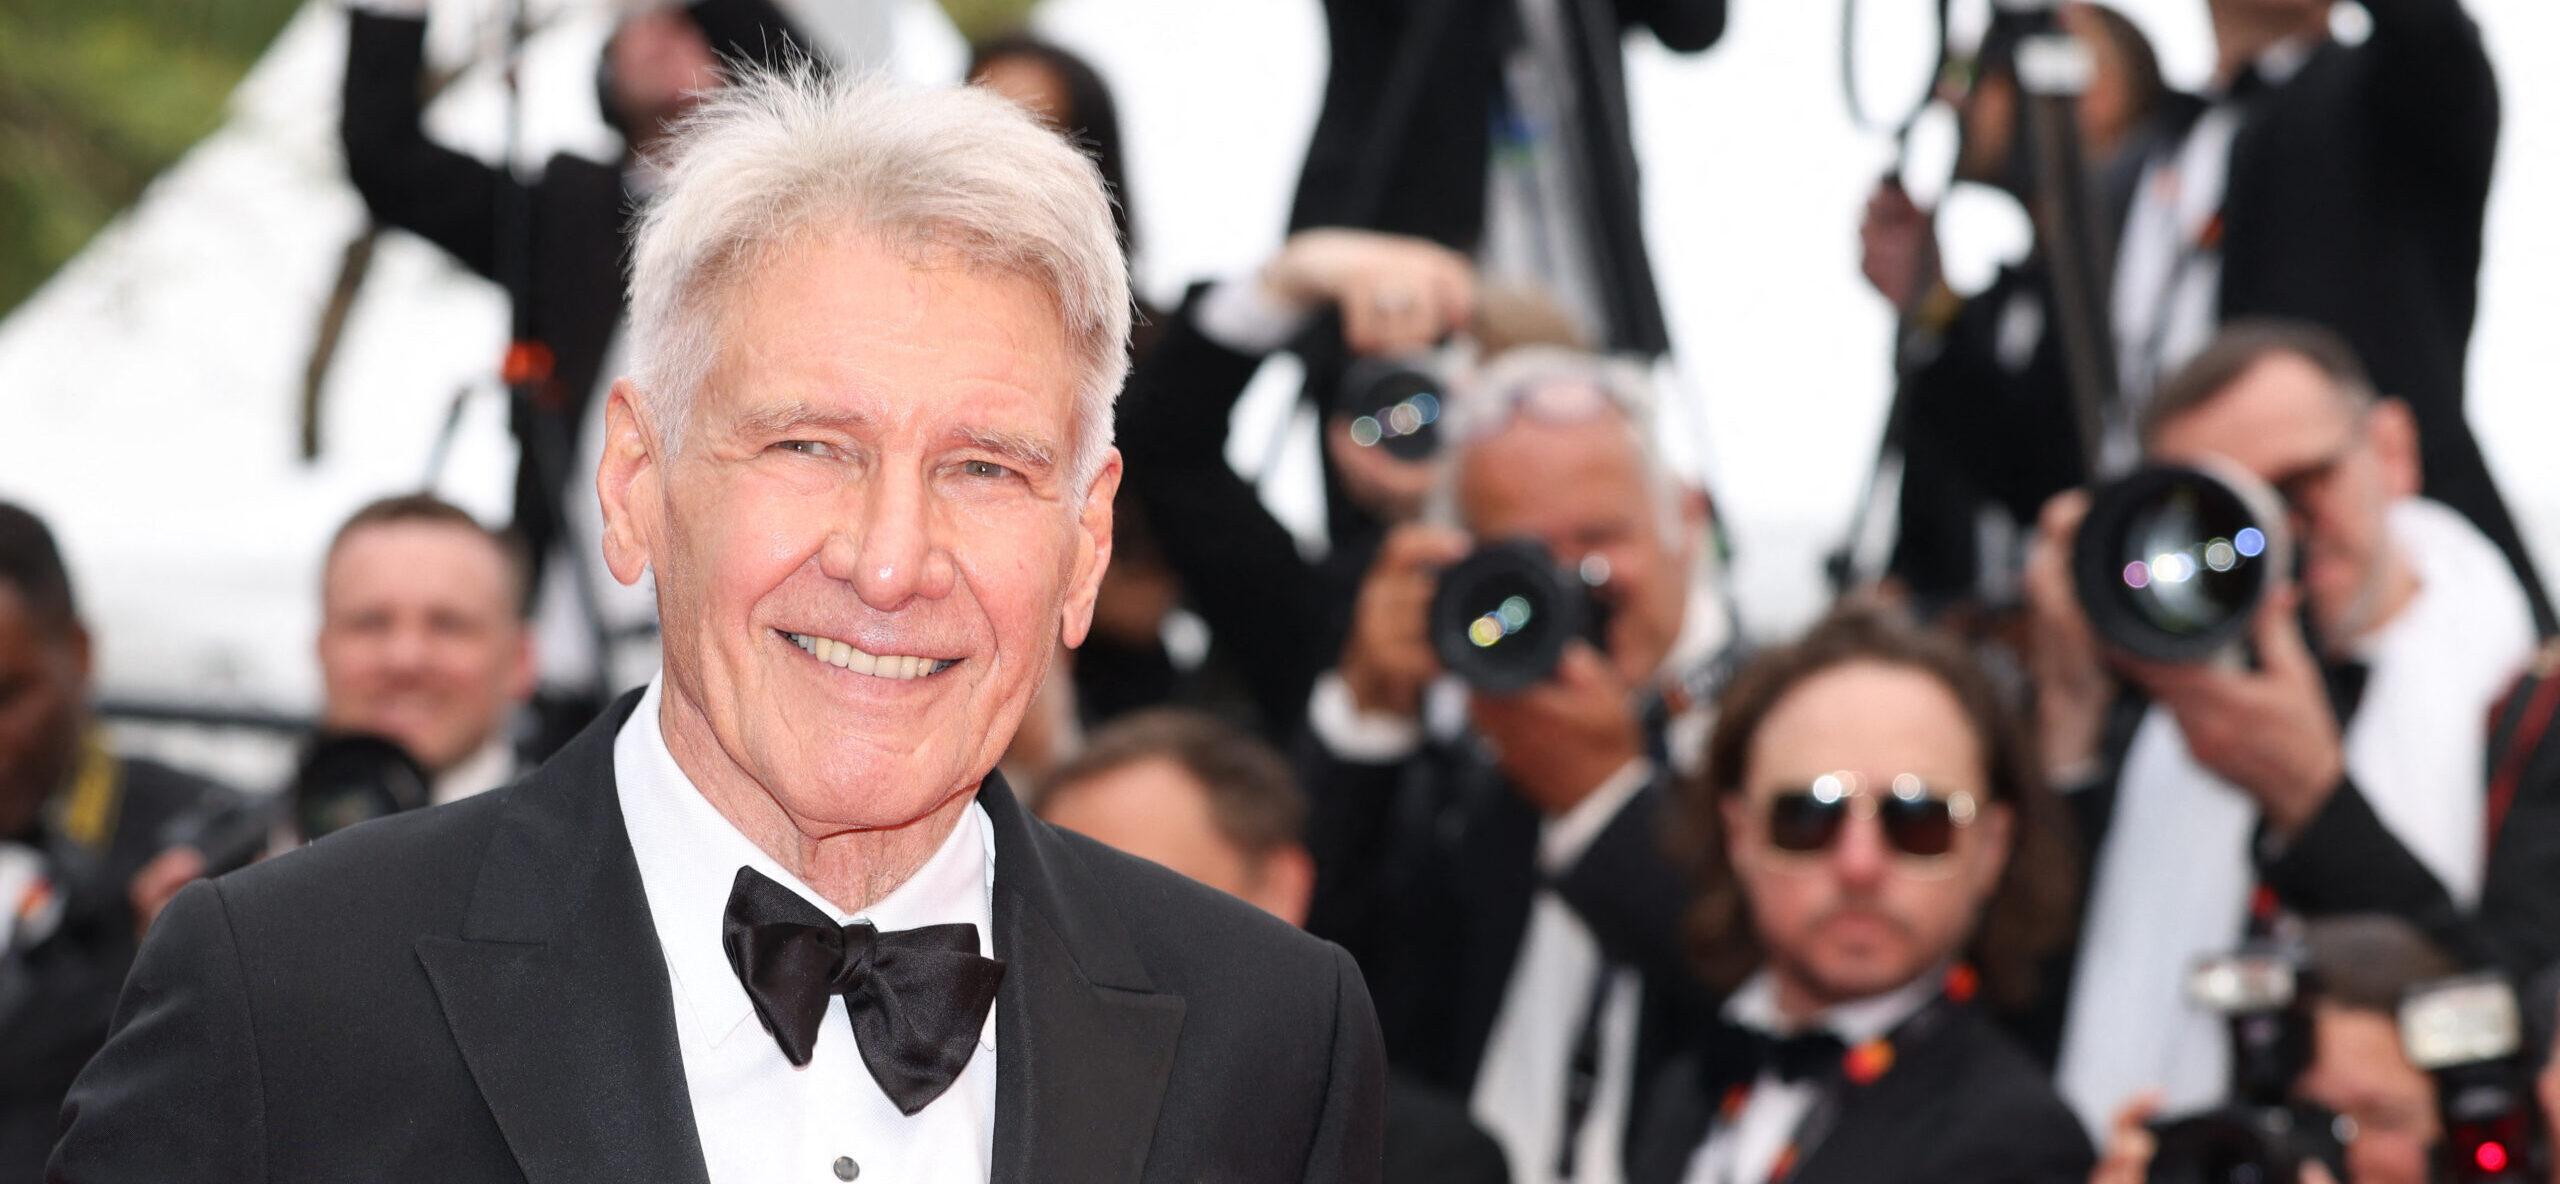 Harrison Ford at the Cannes Film Festival premiere of 'Indiana Jones 5'